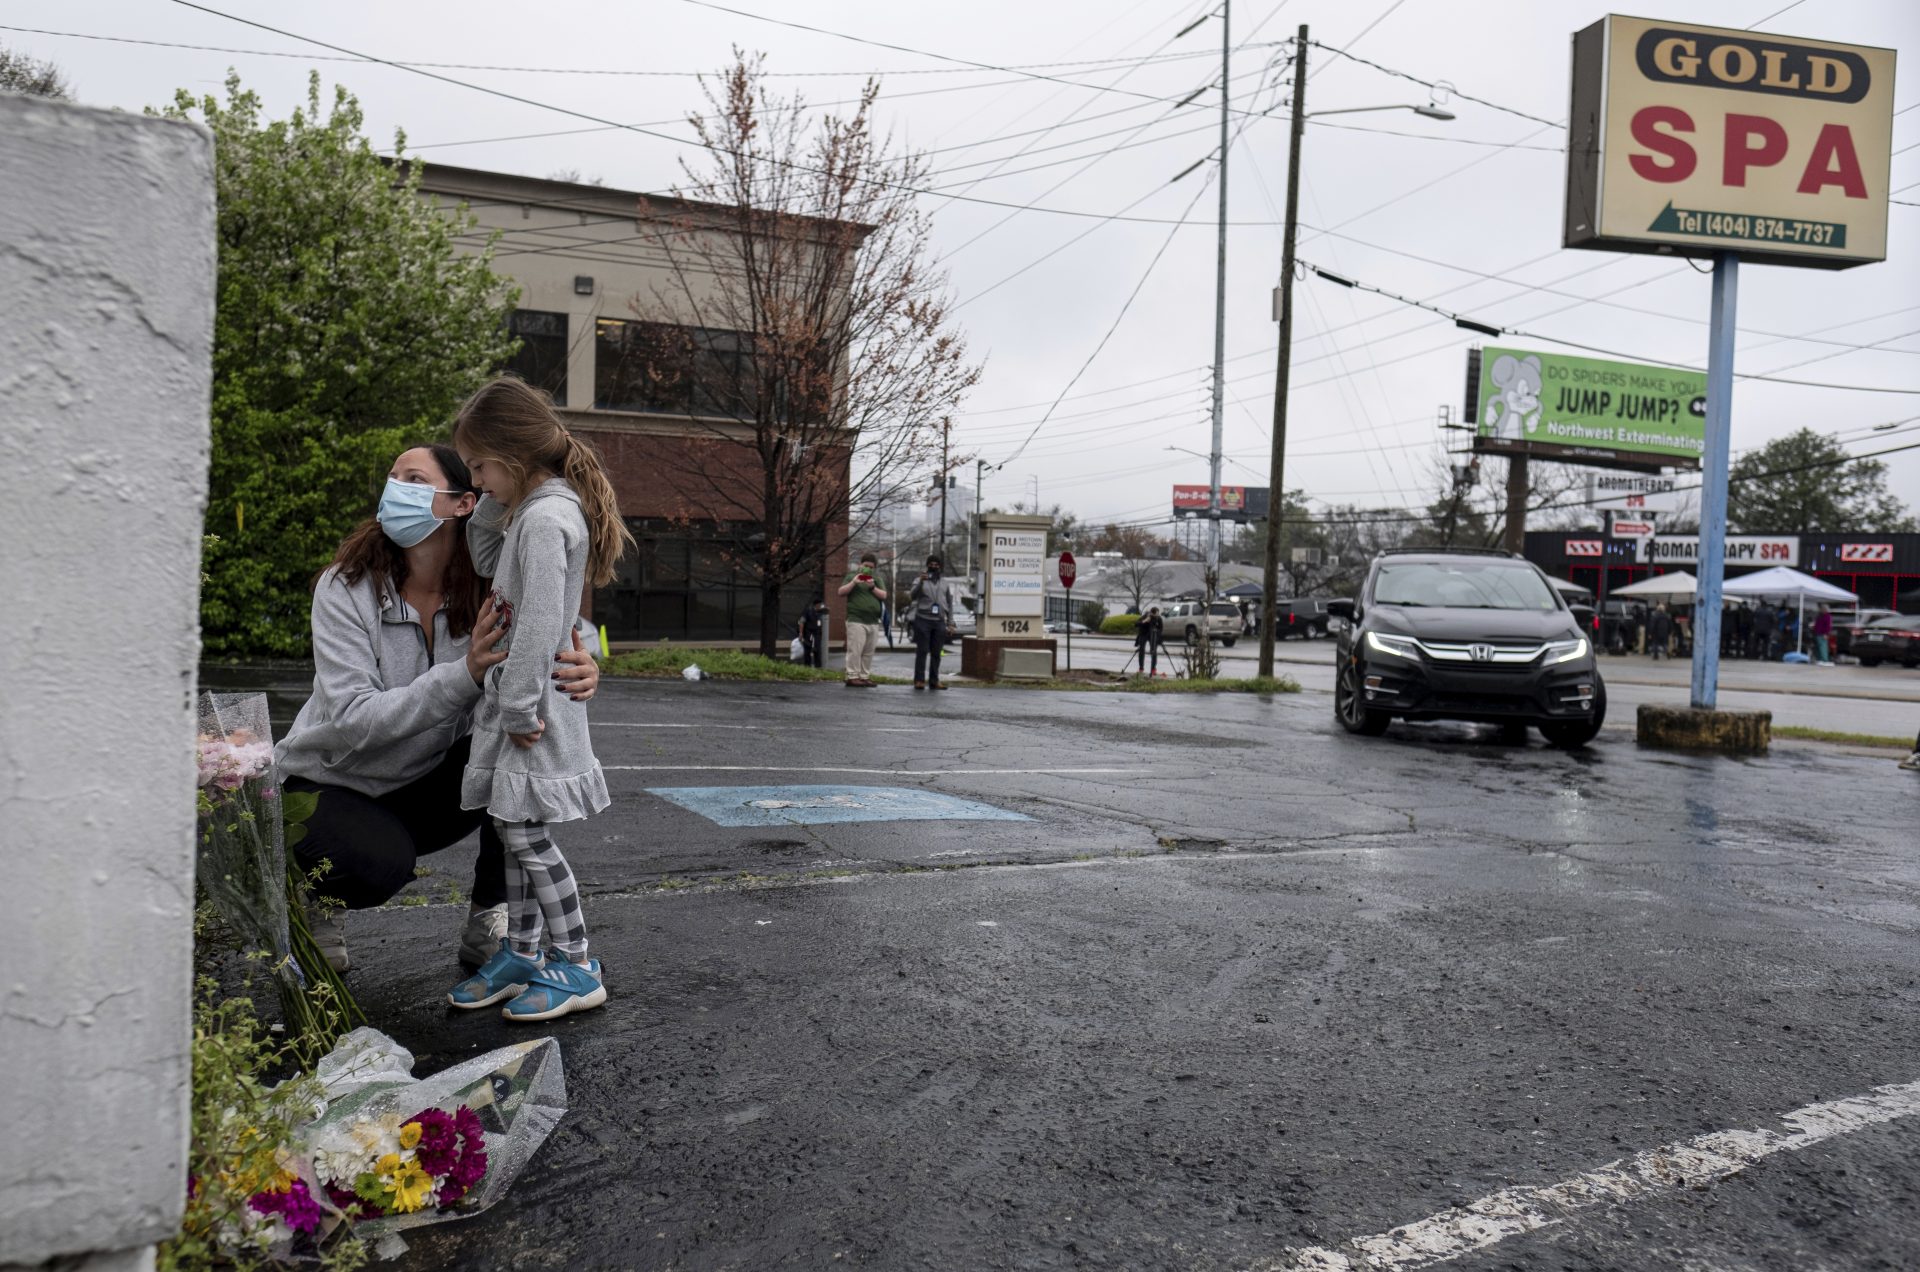 Mallory Rahman and her daughter Zara Rahman, 4, who live nearby, pause after bringing flowers to the Gold Spa massage parlor in Atlanta, Wednesday afternoon, March 17, 2021, the day after eight people were killed at three massage spas in the Atlanta area. Authorities have arrested 21-year-old Robert Aaron Long in the shootings at massage parlors in Atlanta and one in Cherokee County.